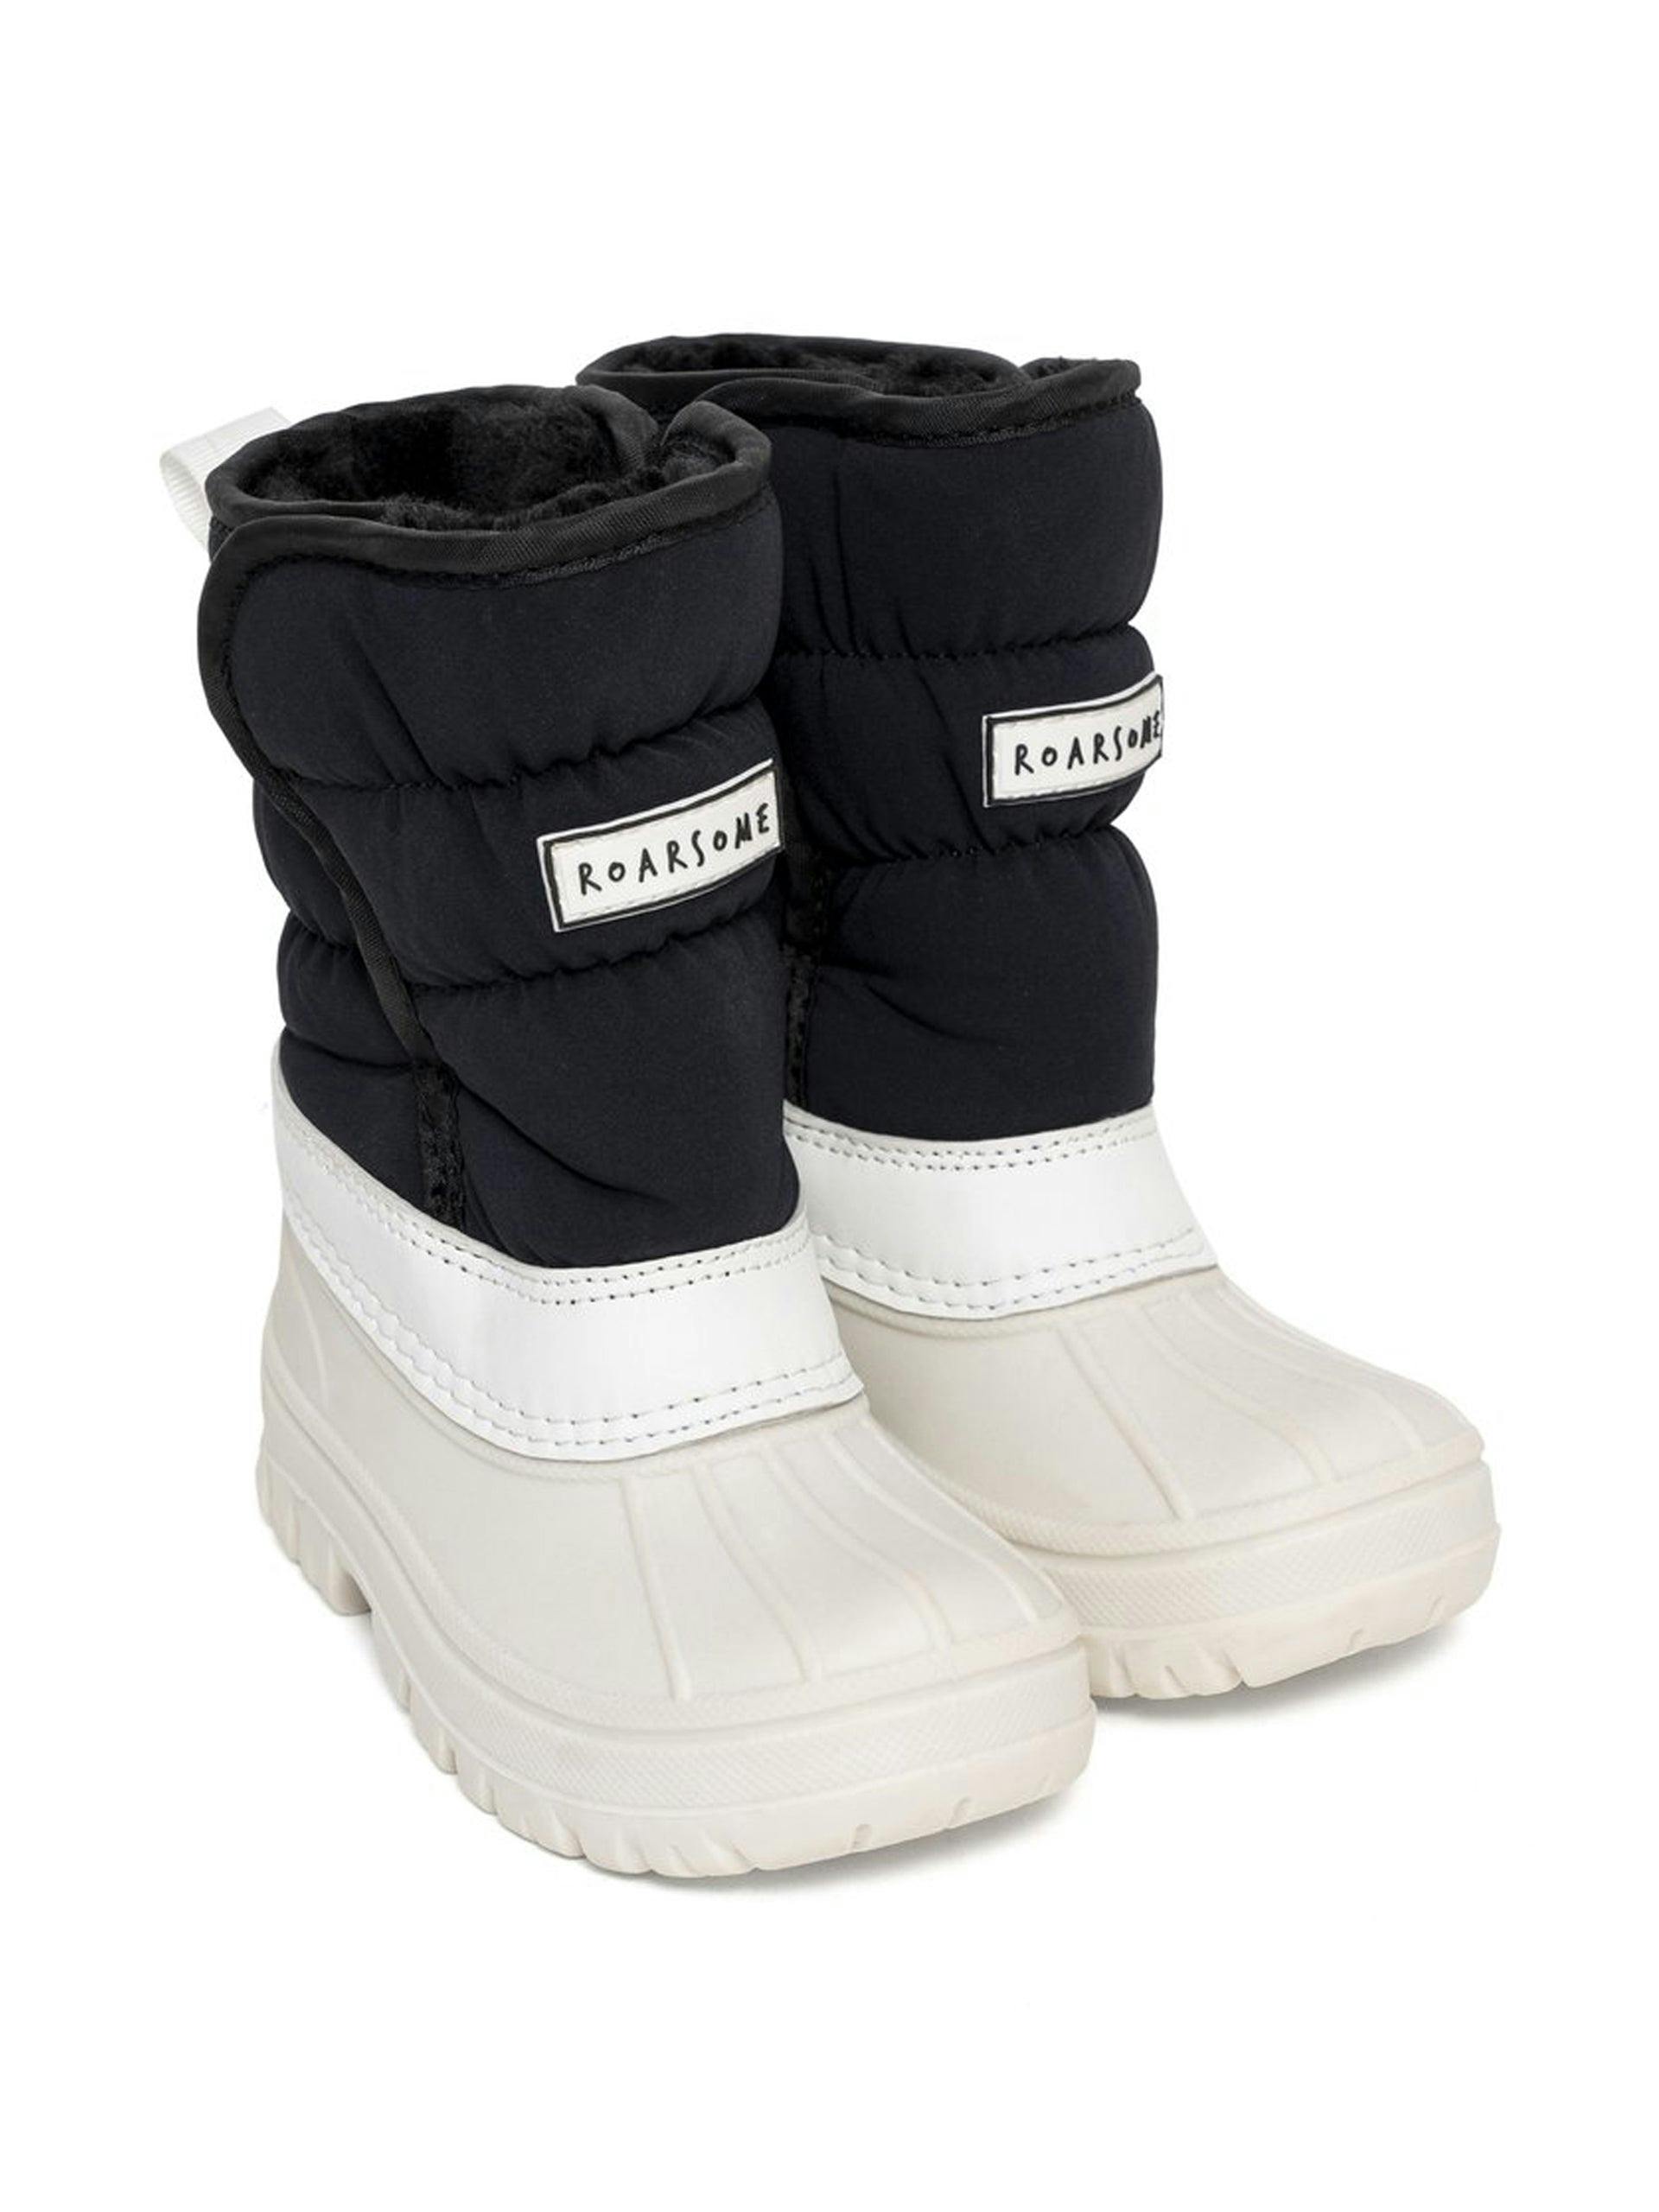 Black and white snow boots